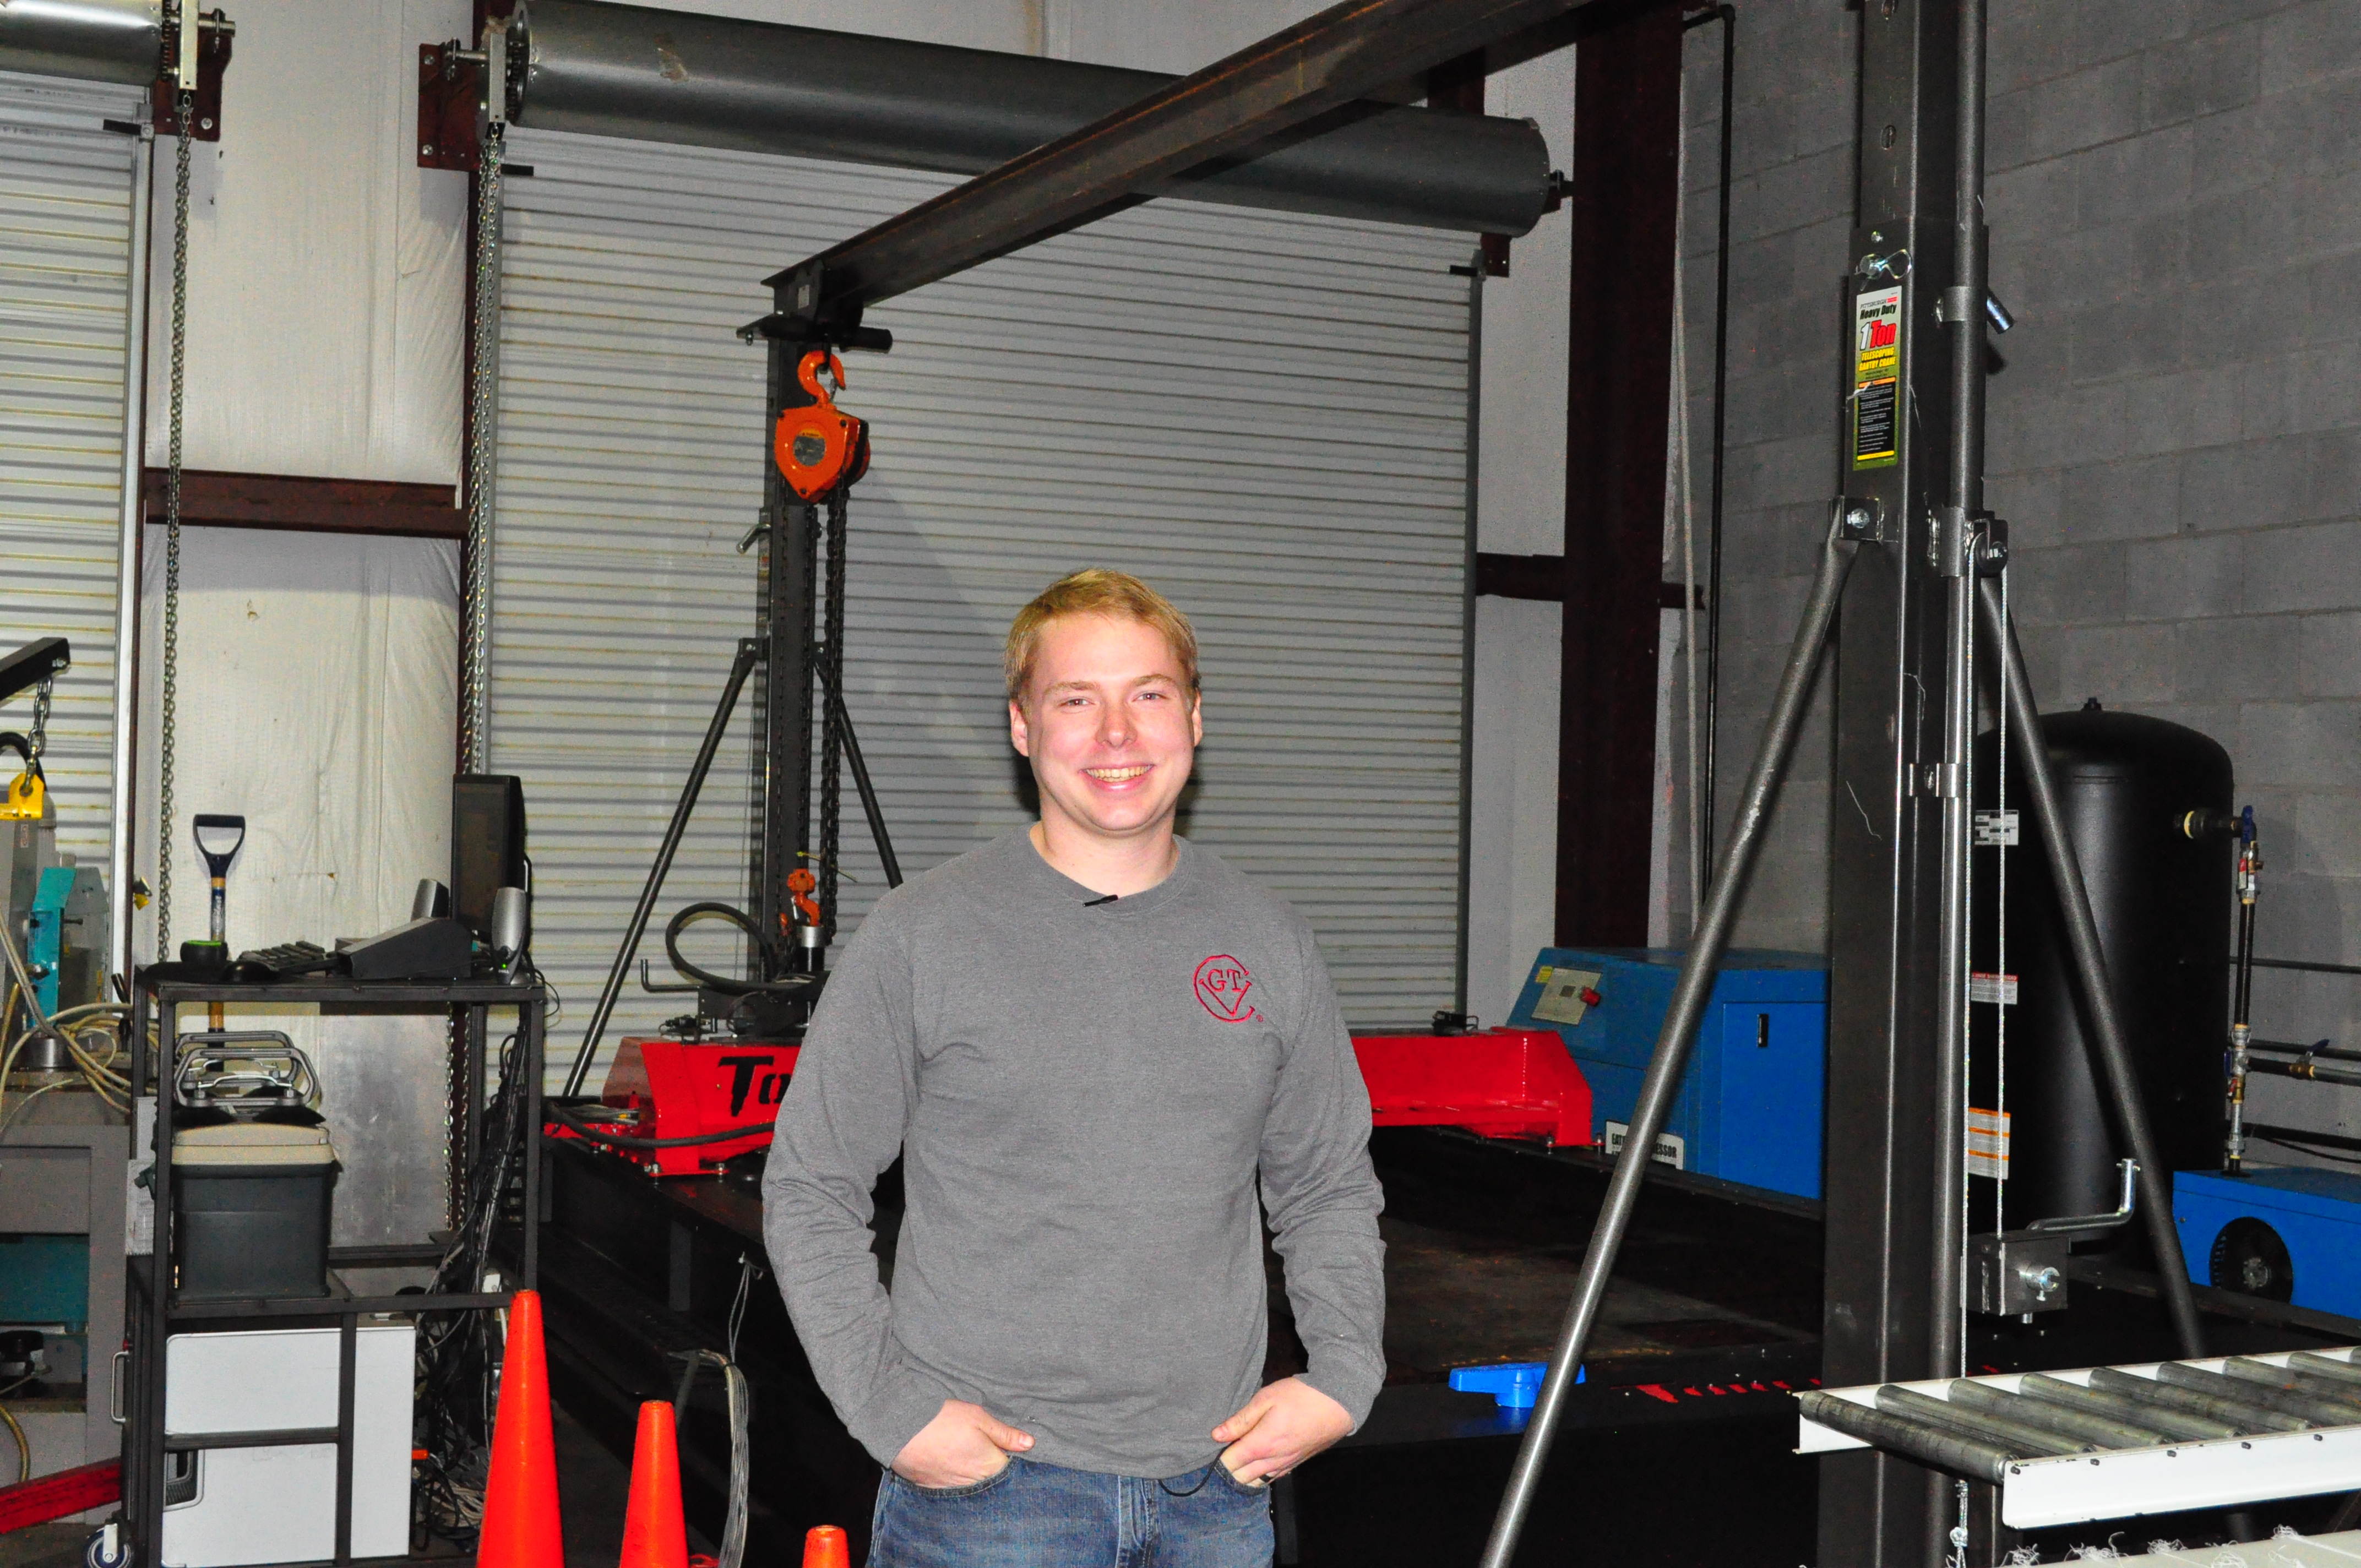 Steven Shaw of Coweta County is a tooling and design engineer at GT Virtual Concepts (GTVC), a Newnan-based machine shop.